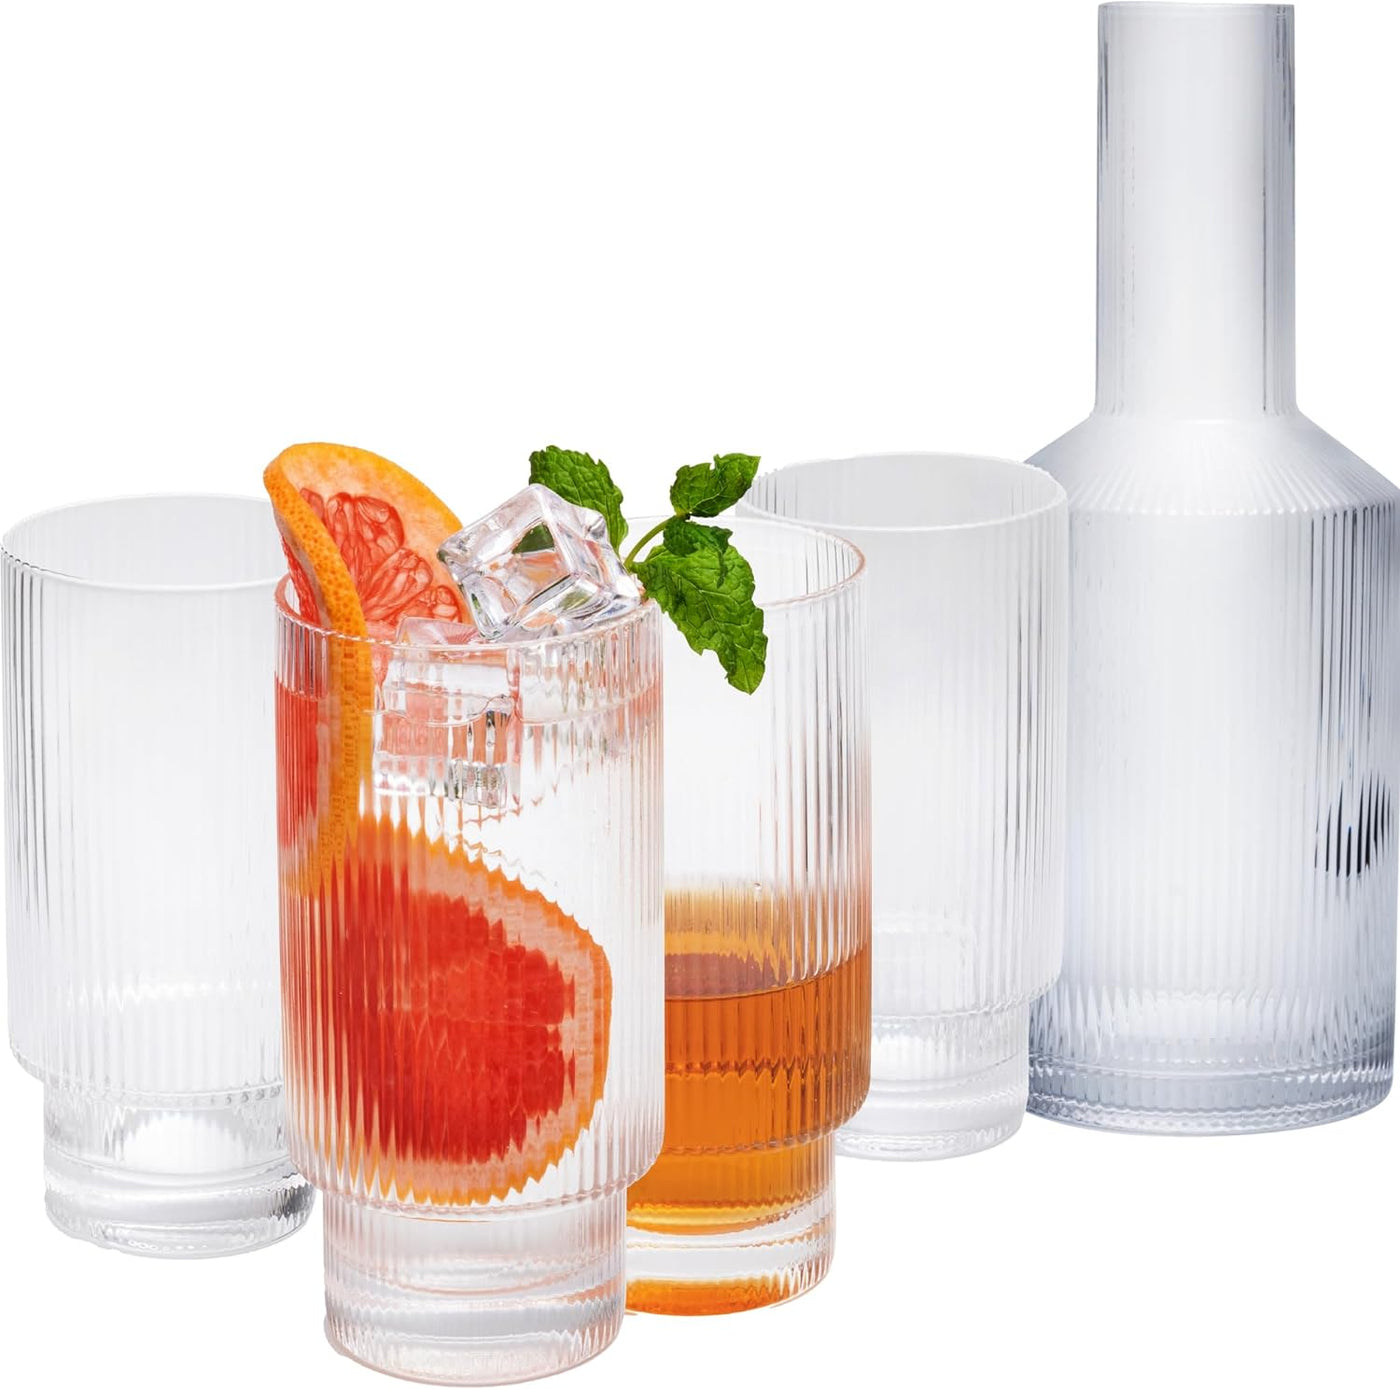 Ribbed Drinking Glasses: Elevate Your Drinkware Collection with Stylish Power